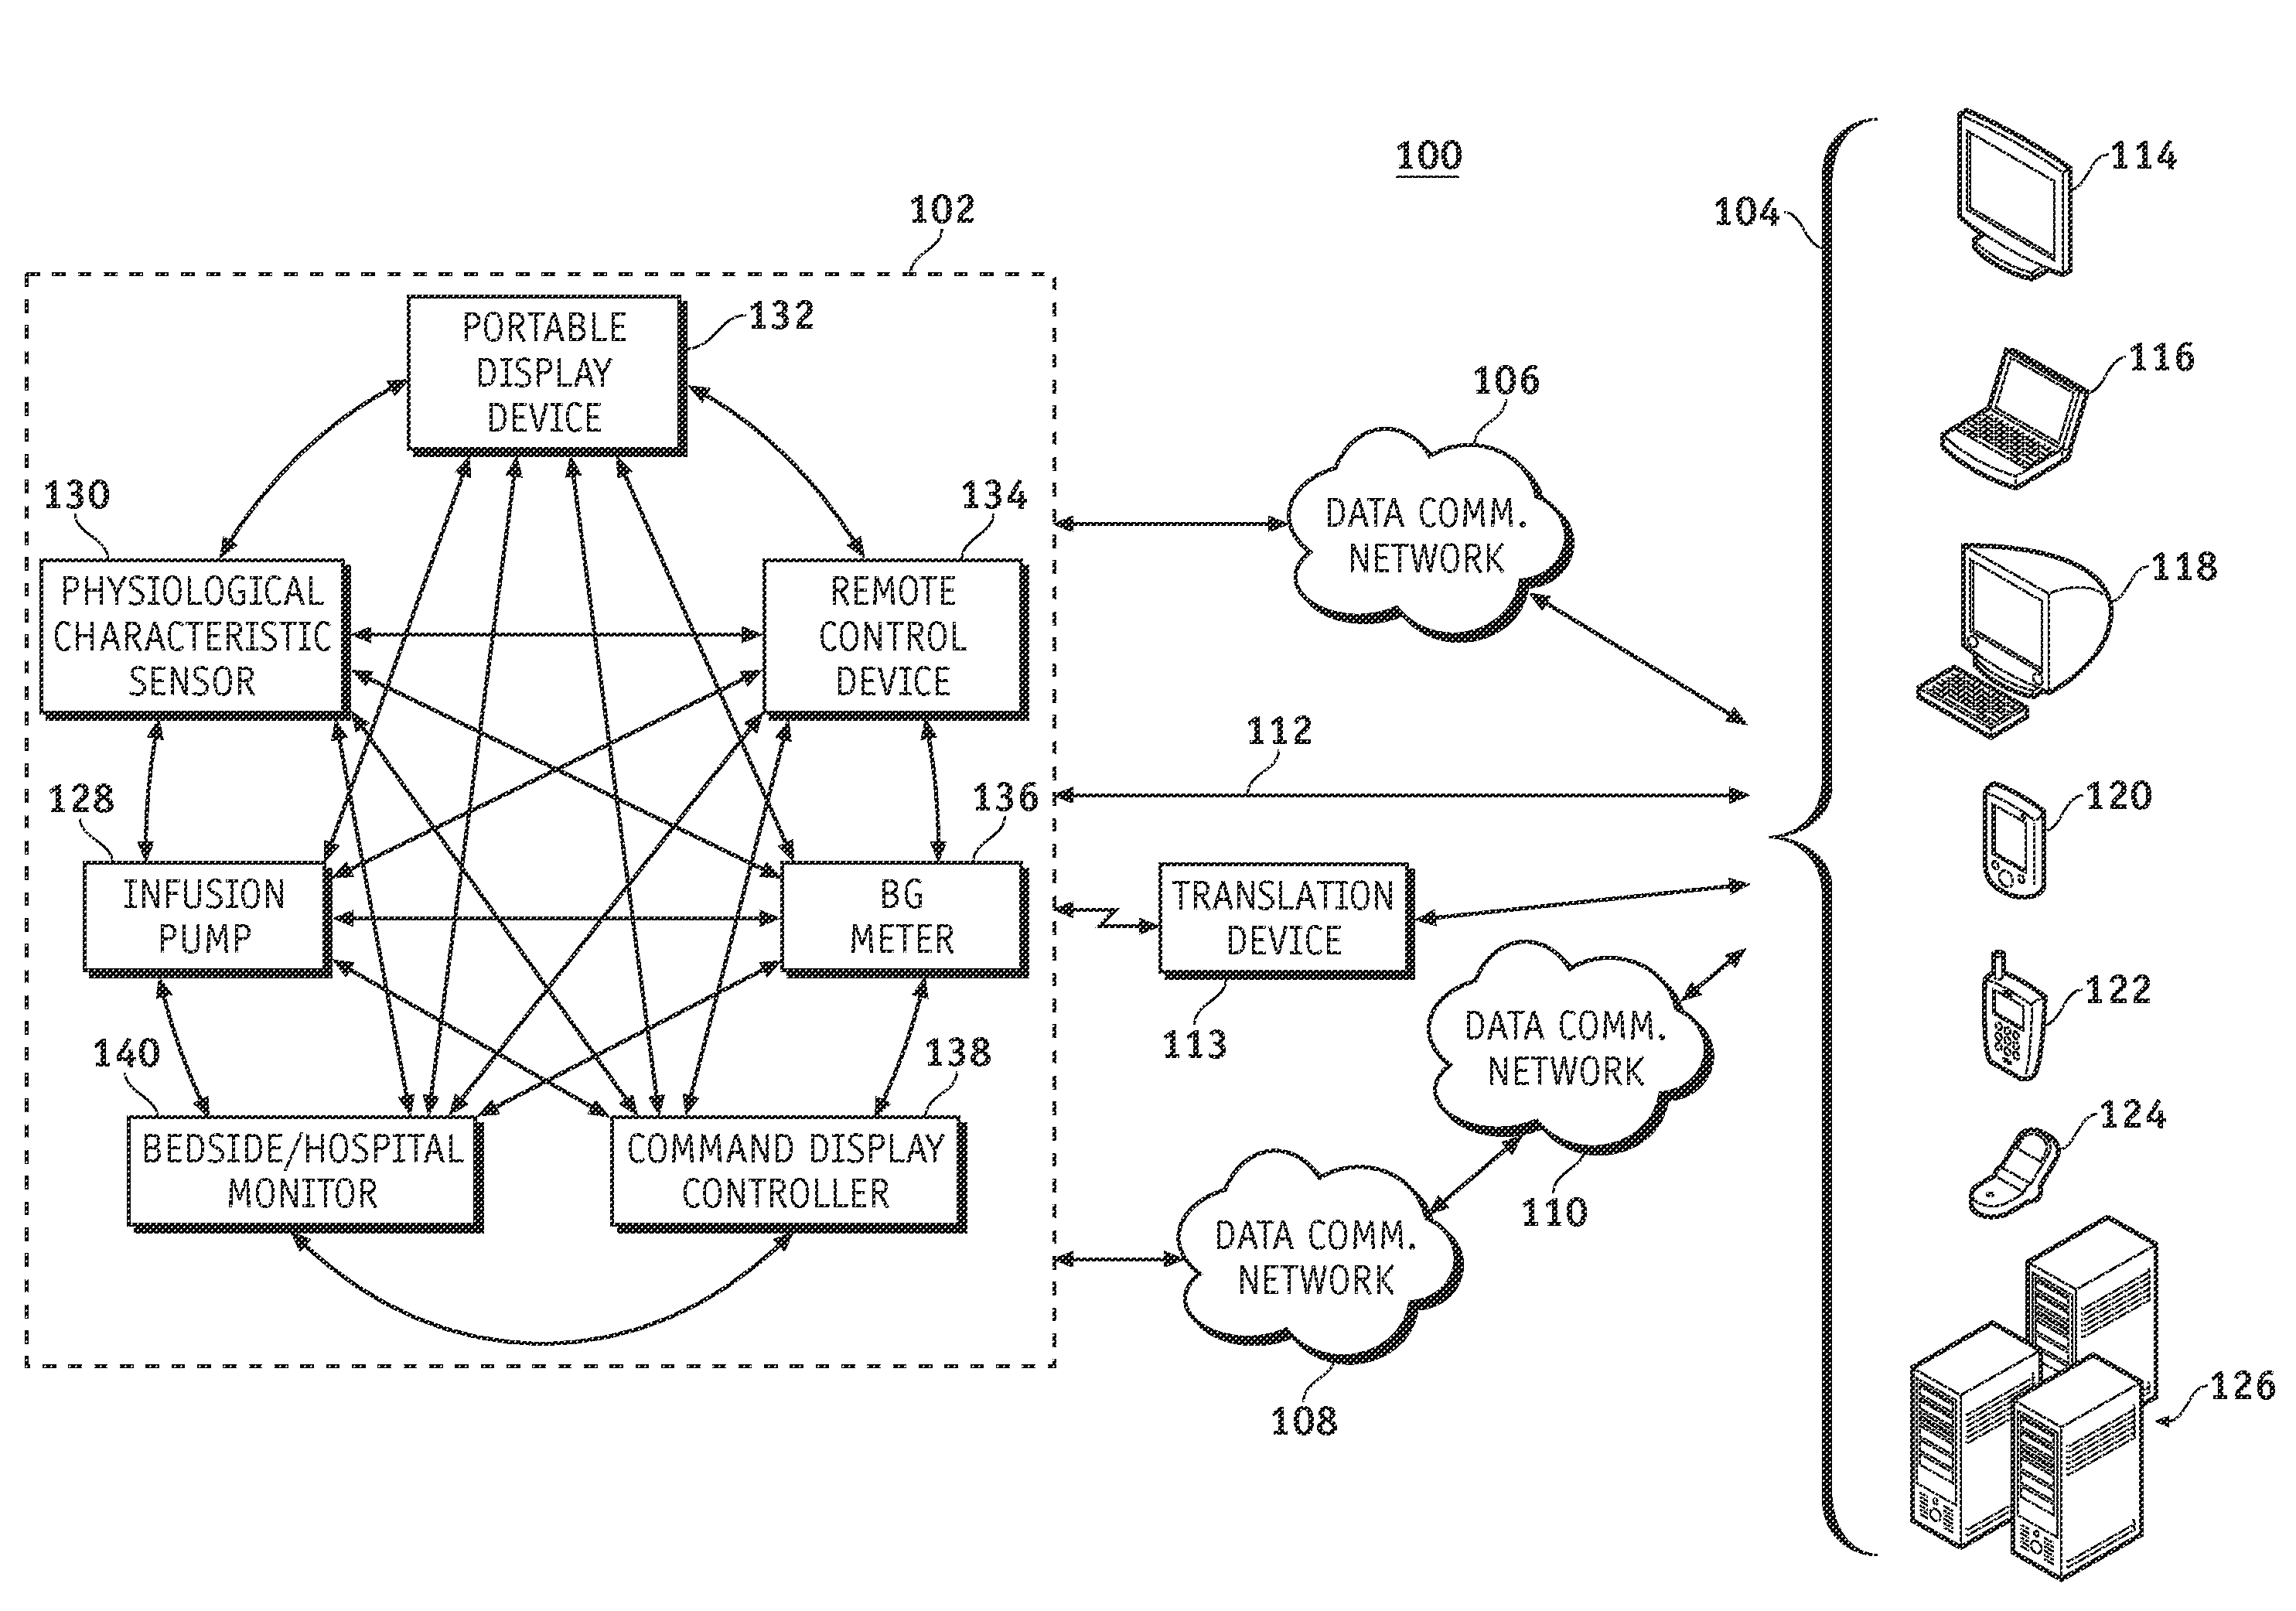 Remote monitoring for networked fluid infusion systems